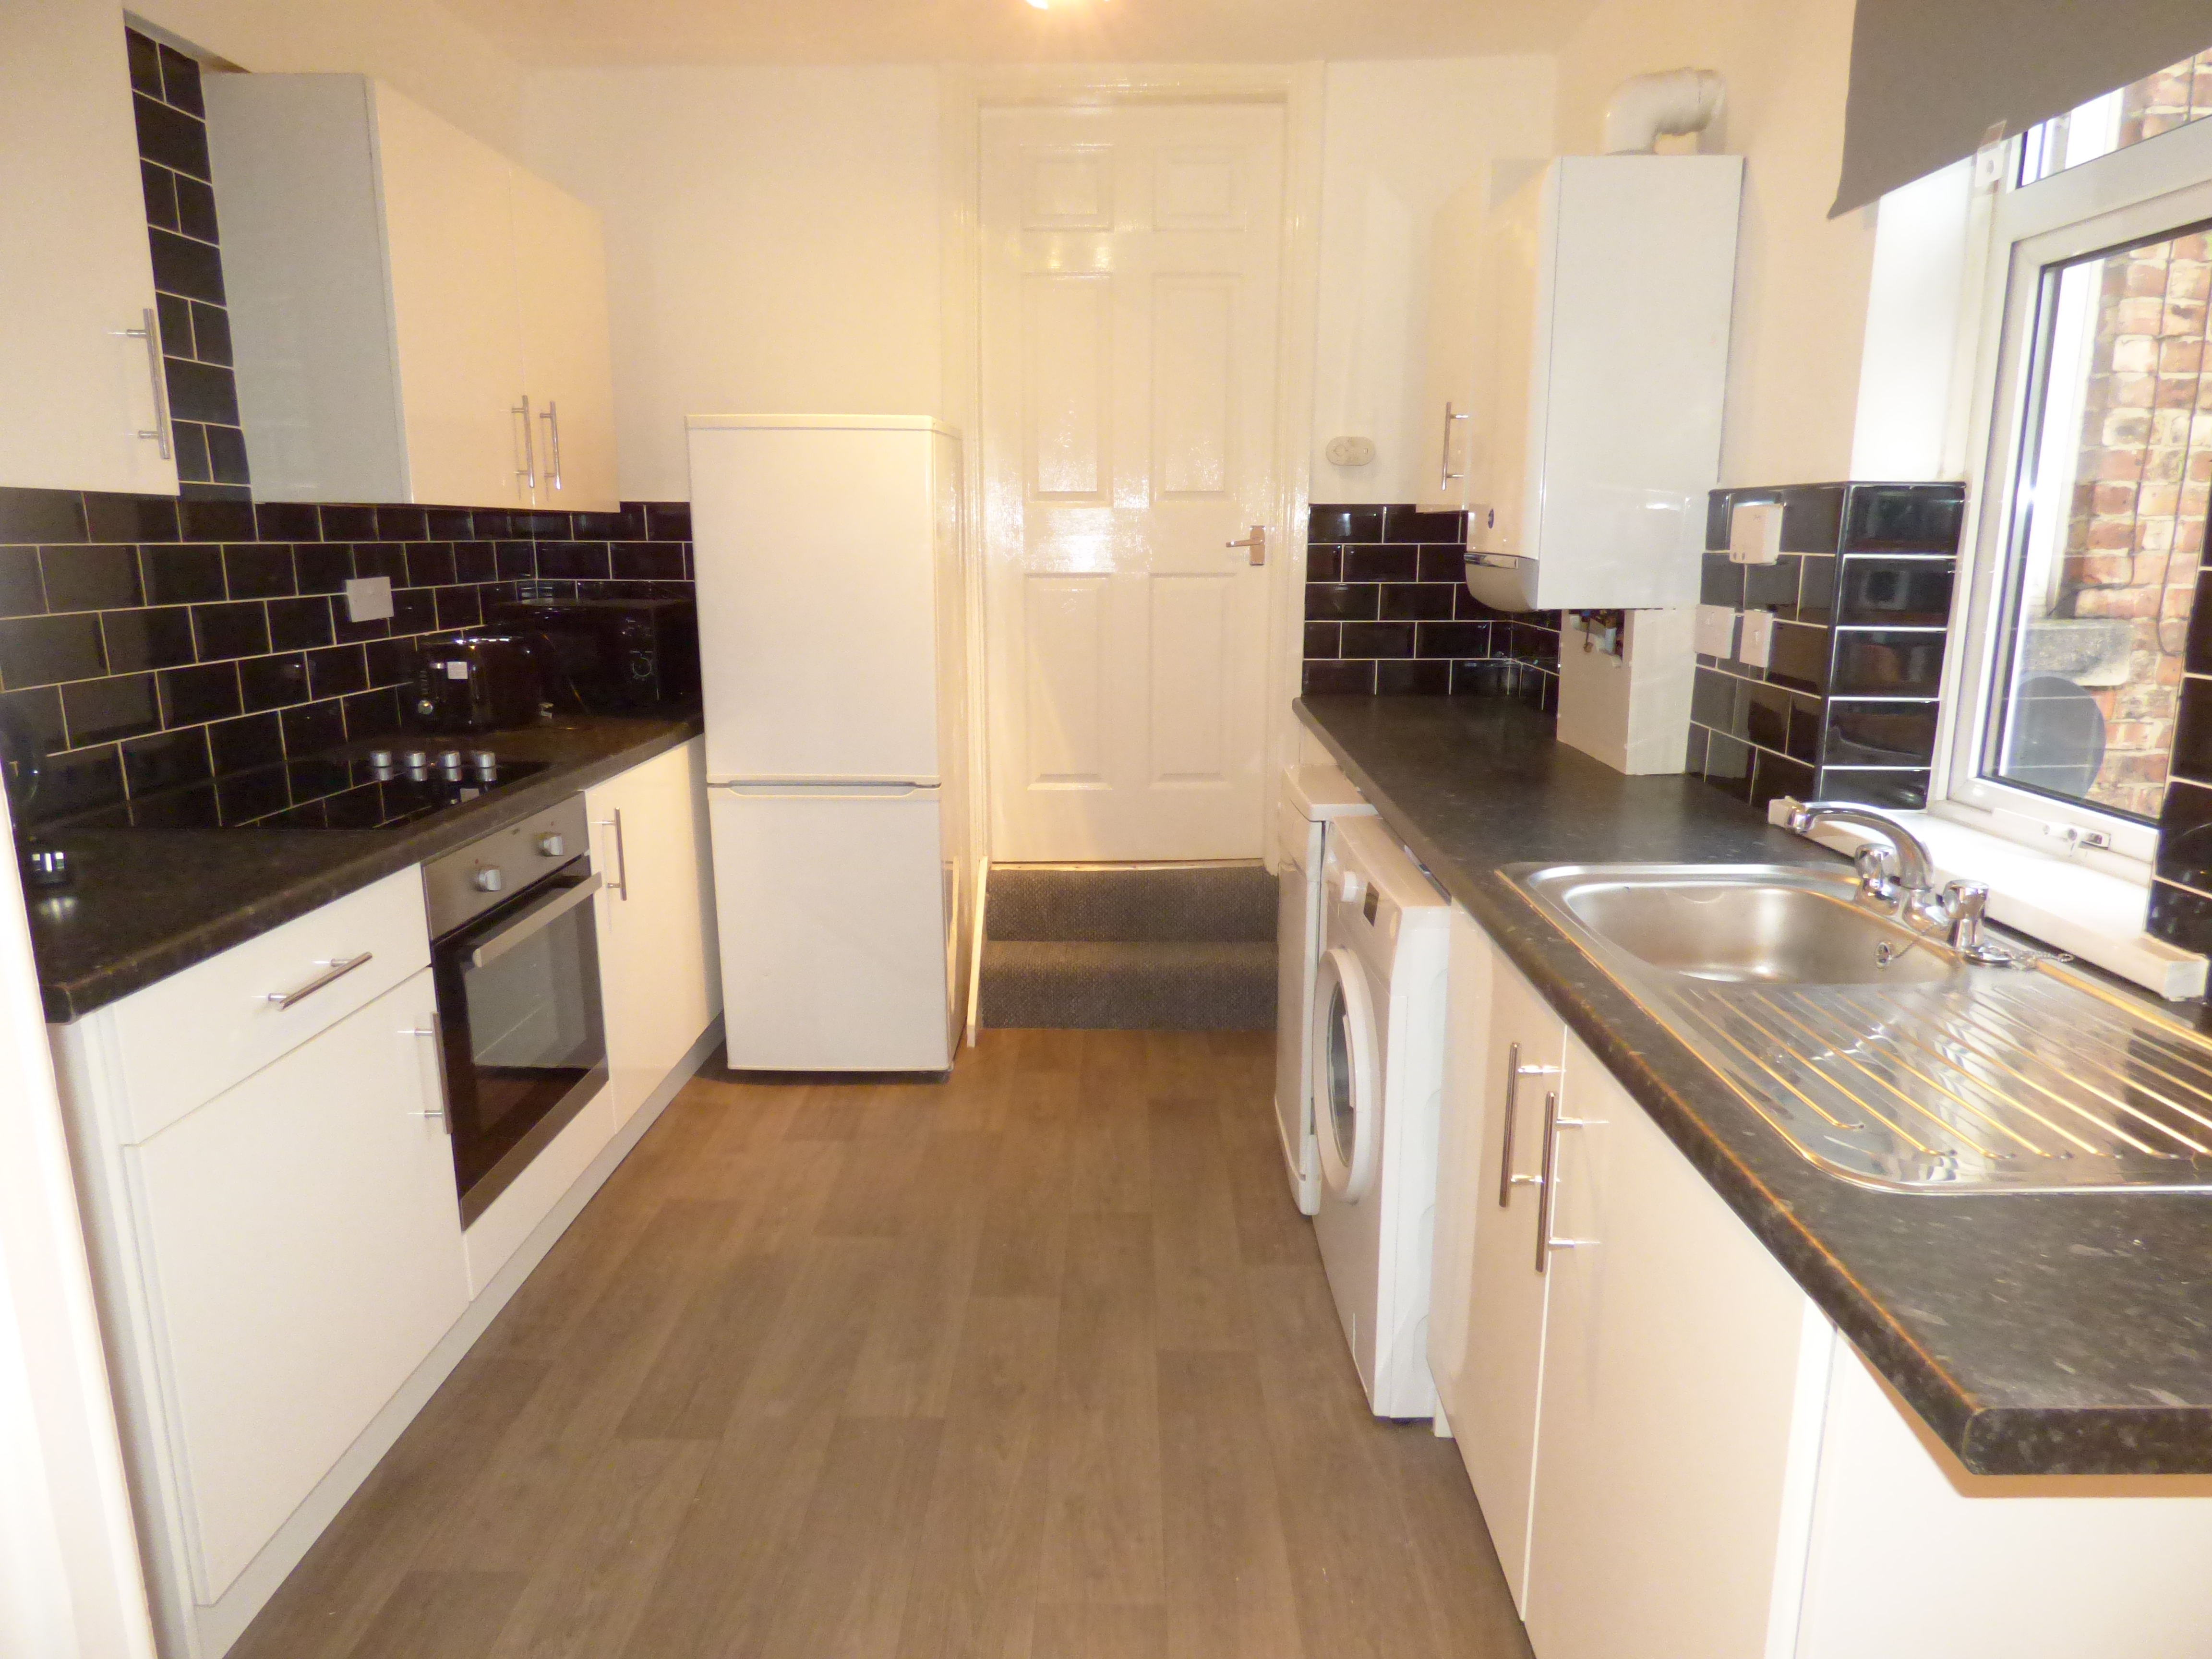 3 bed flat to rent in Warton Terrace, Newcastle upon tyne - Property Image 1